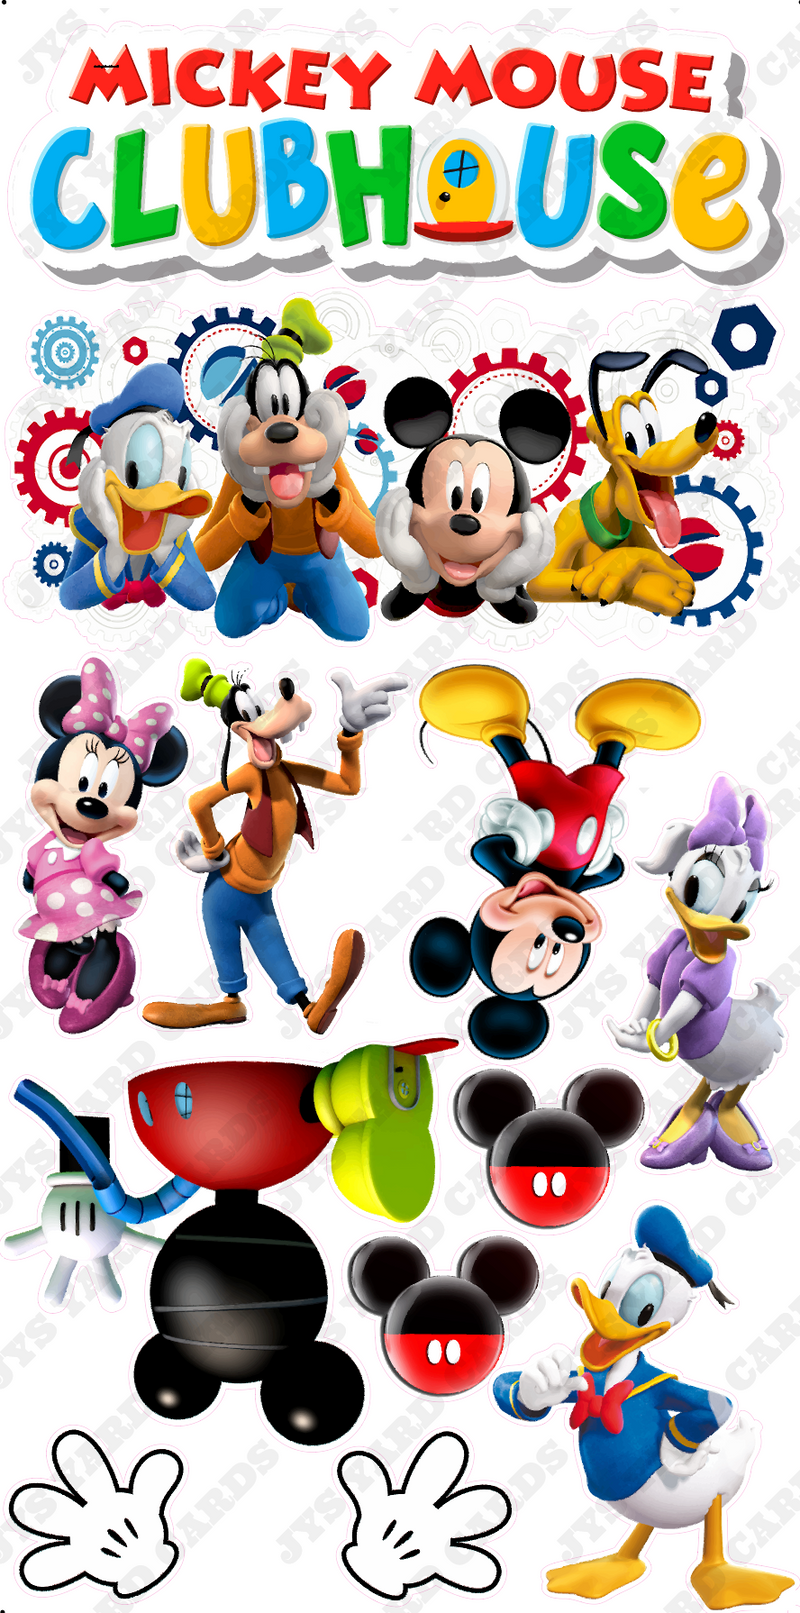 THE MOUSE CLUBHOUSE